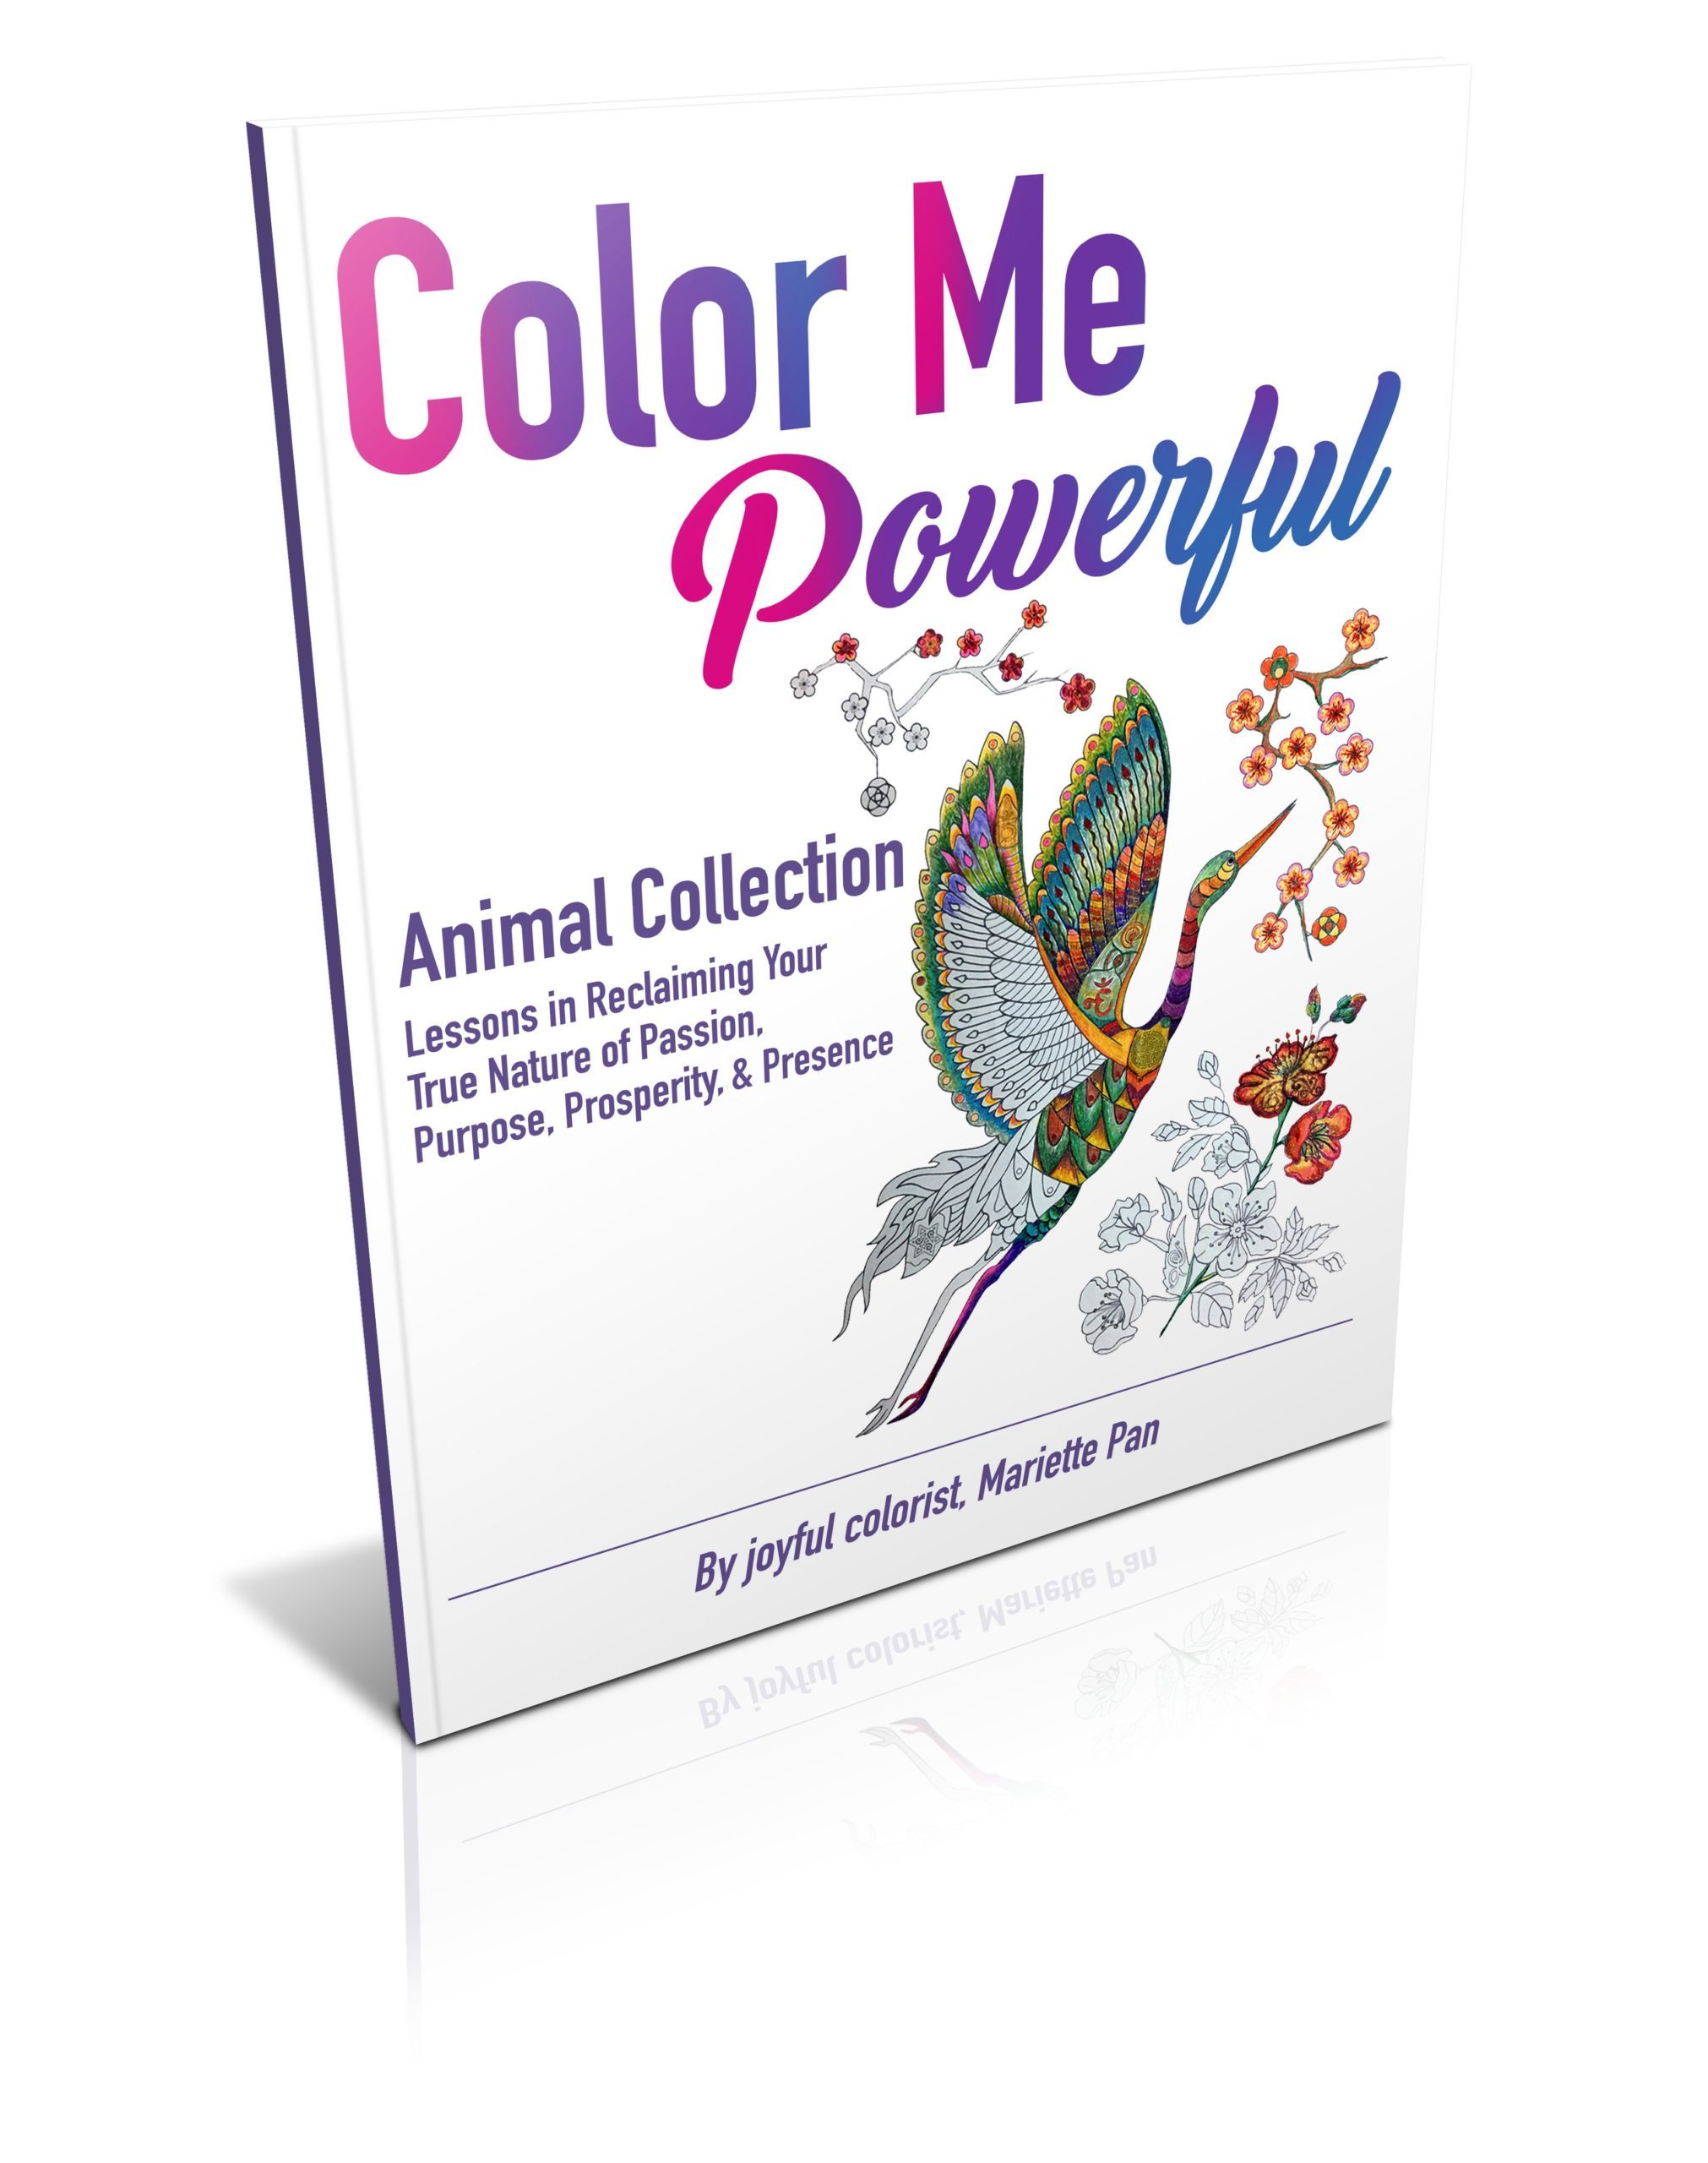 Color Me Powerful Animal Collection Downloadable Book